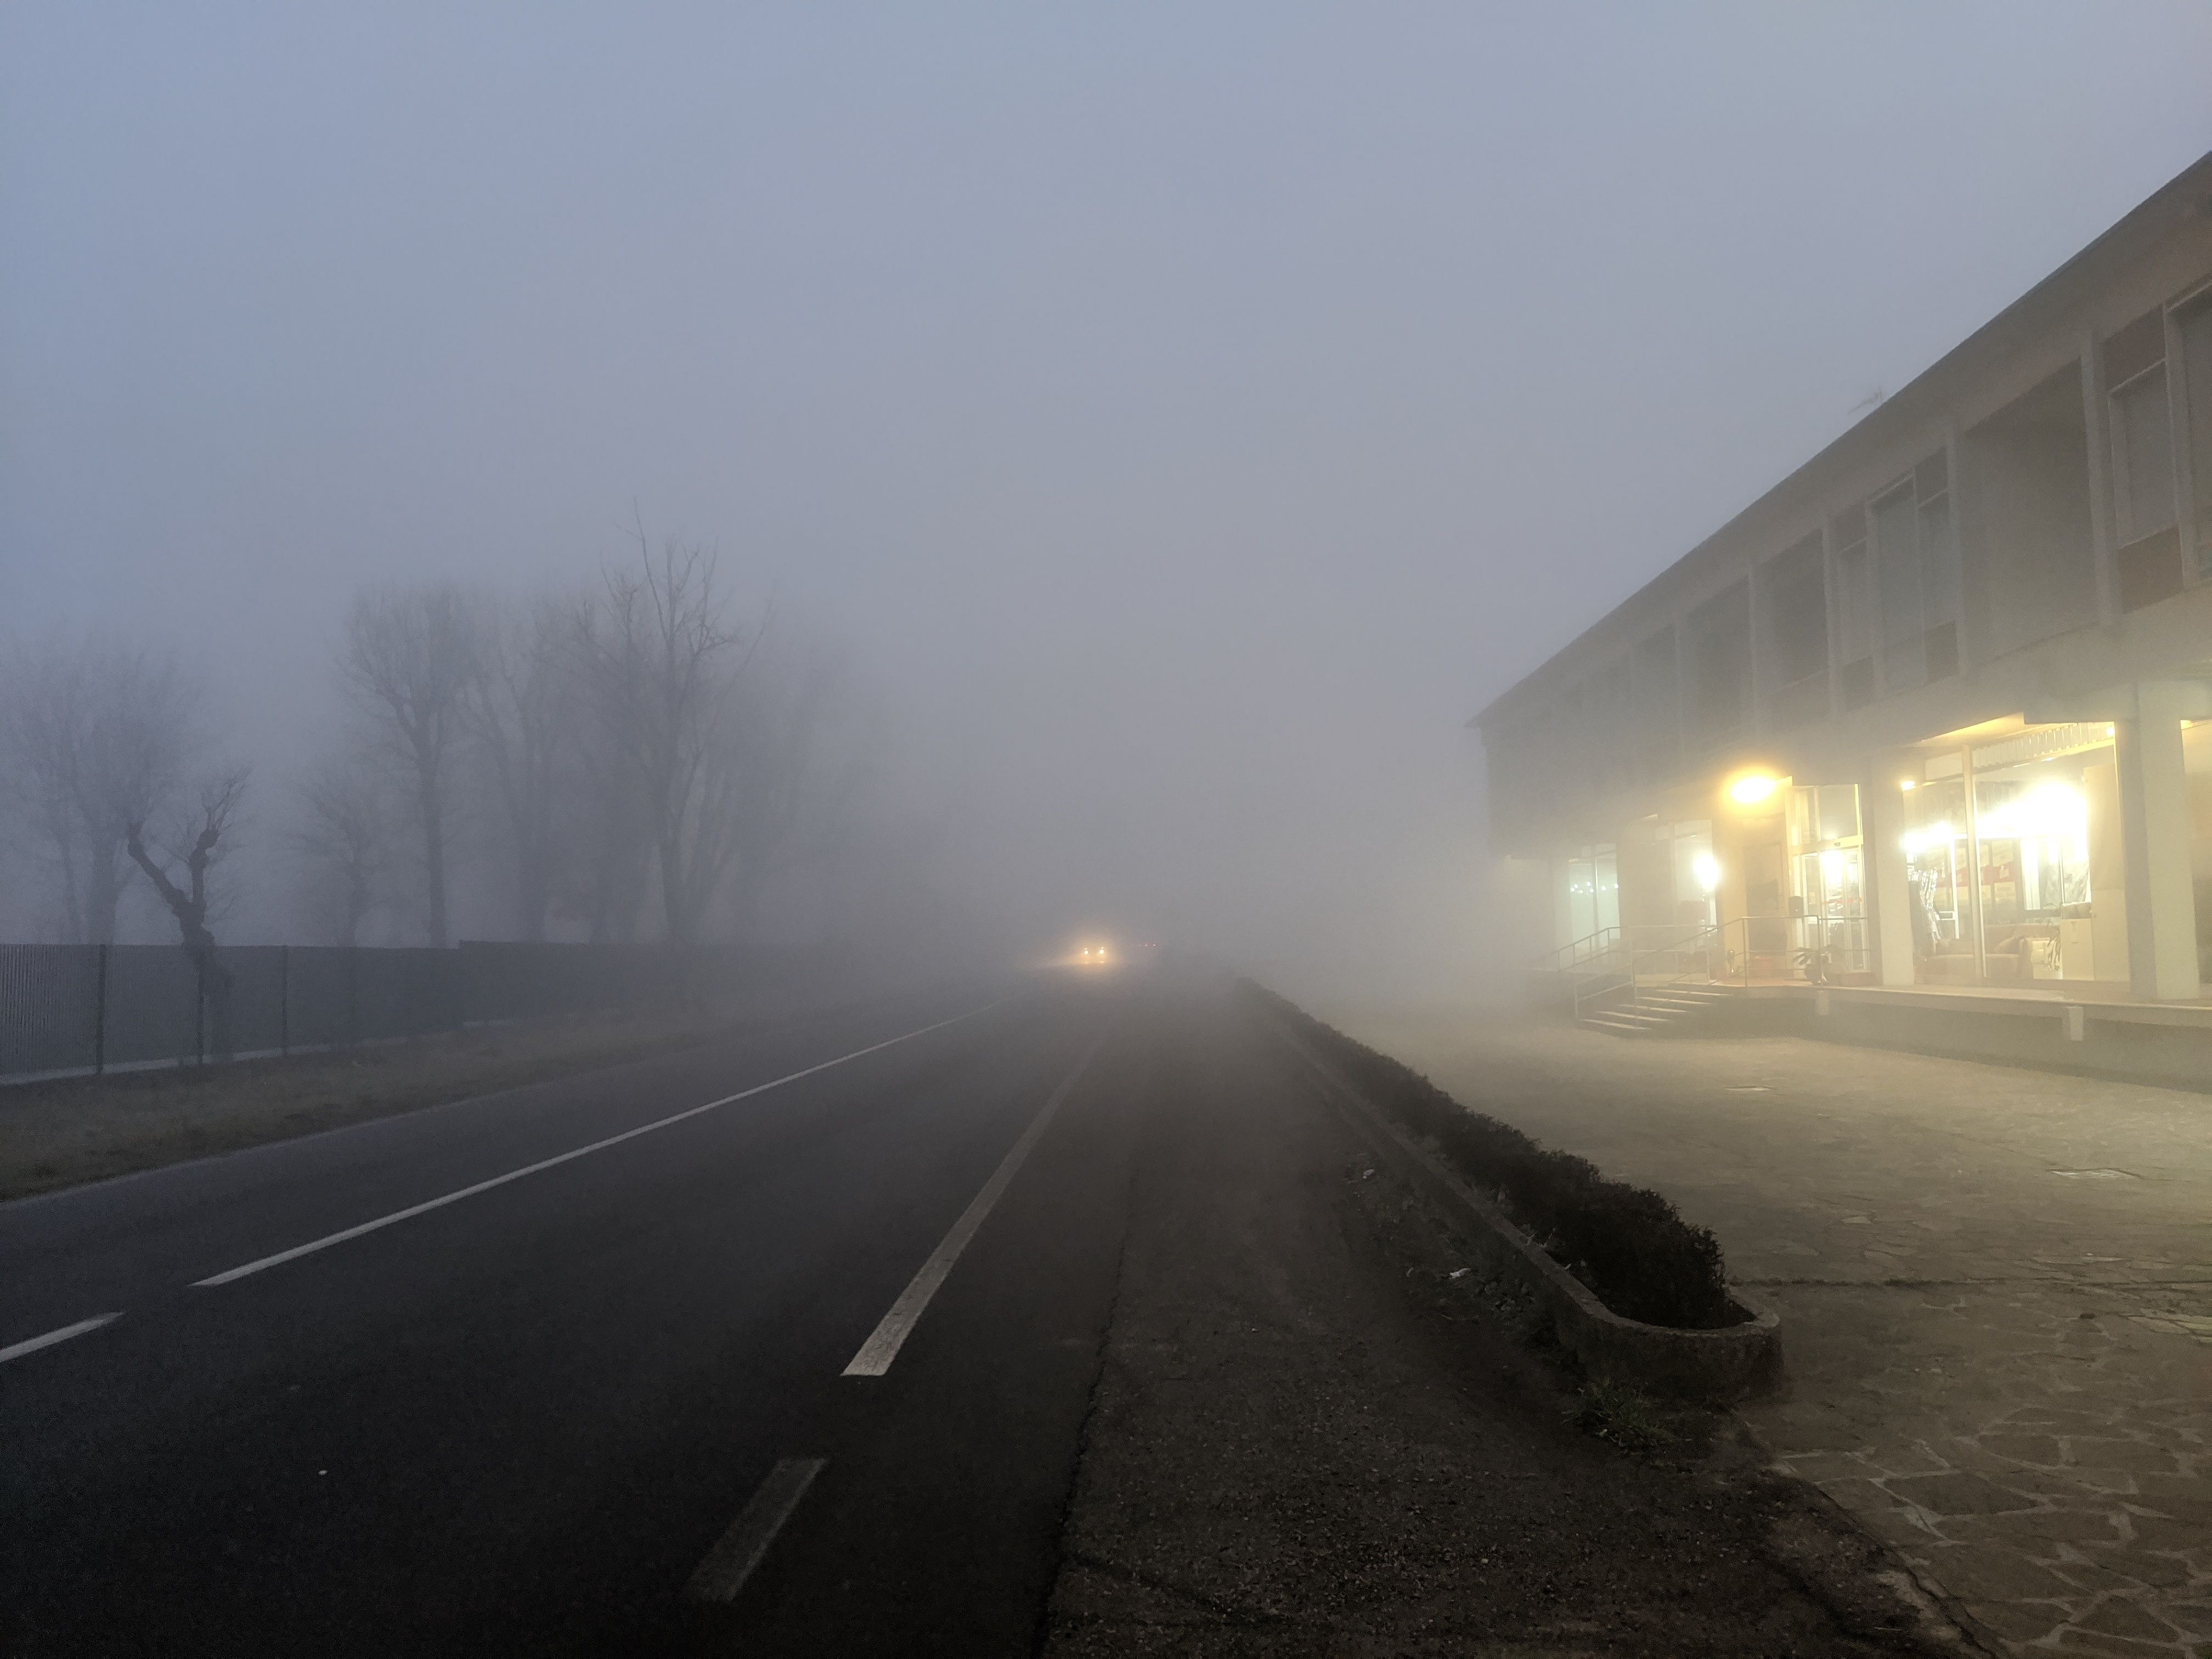 Panorama of a way surrounded by fog